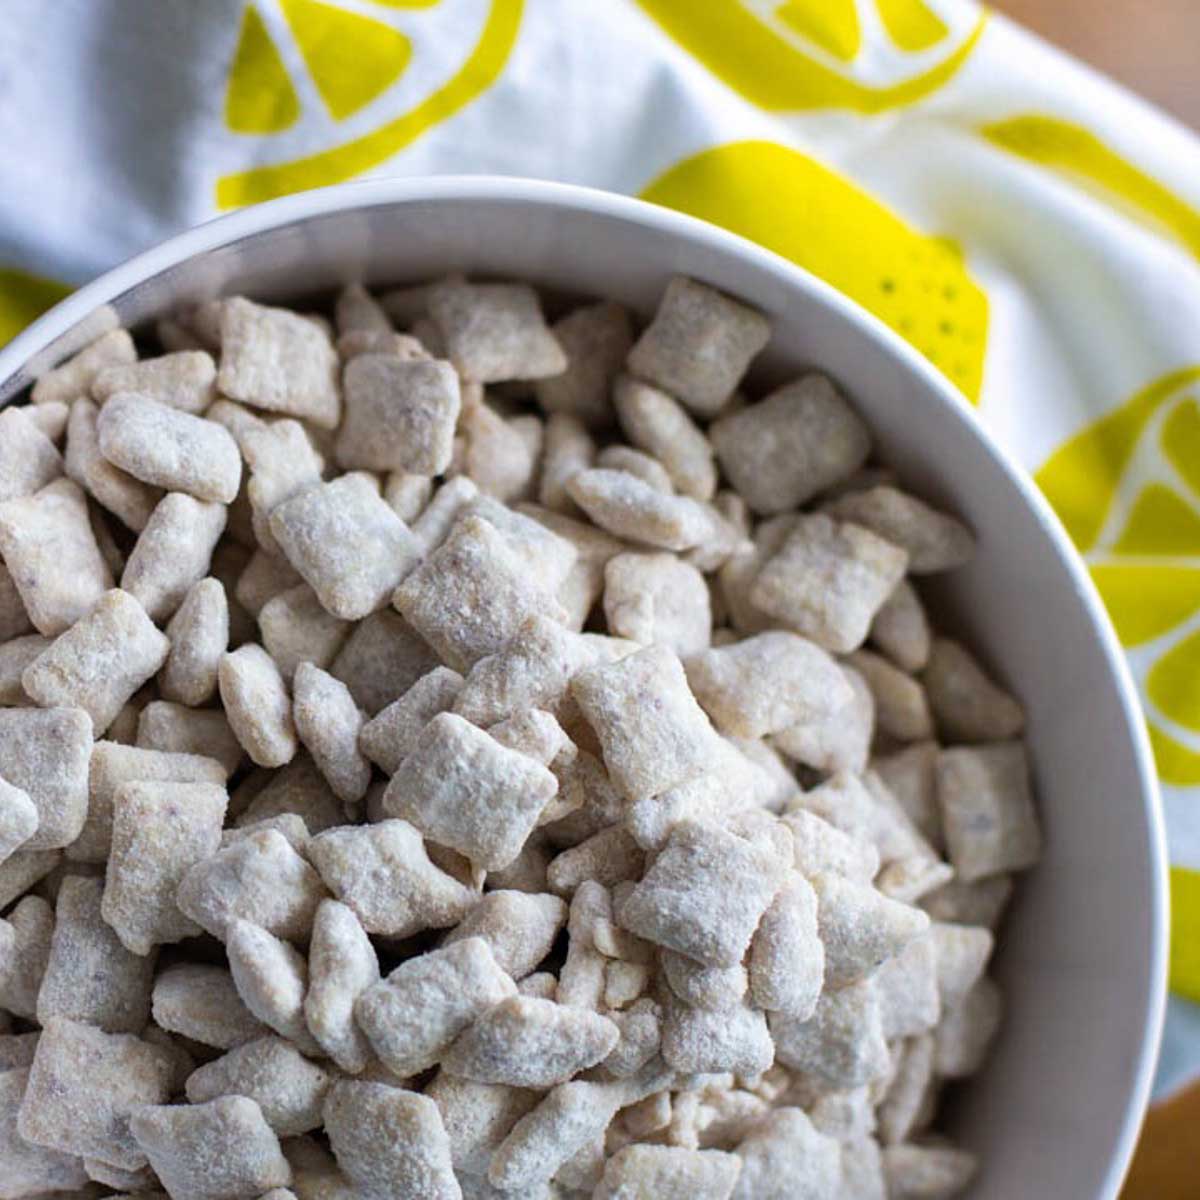 A bowl of powdered sugar coated Chex cereal next to a napkin with lemons on it.